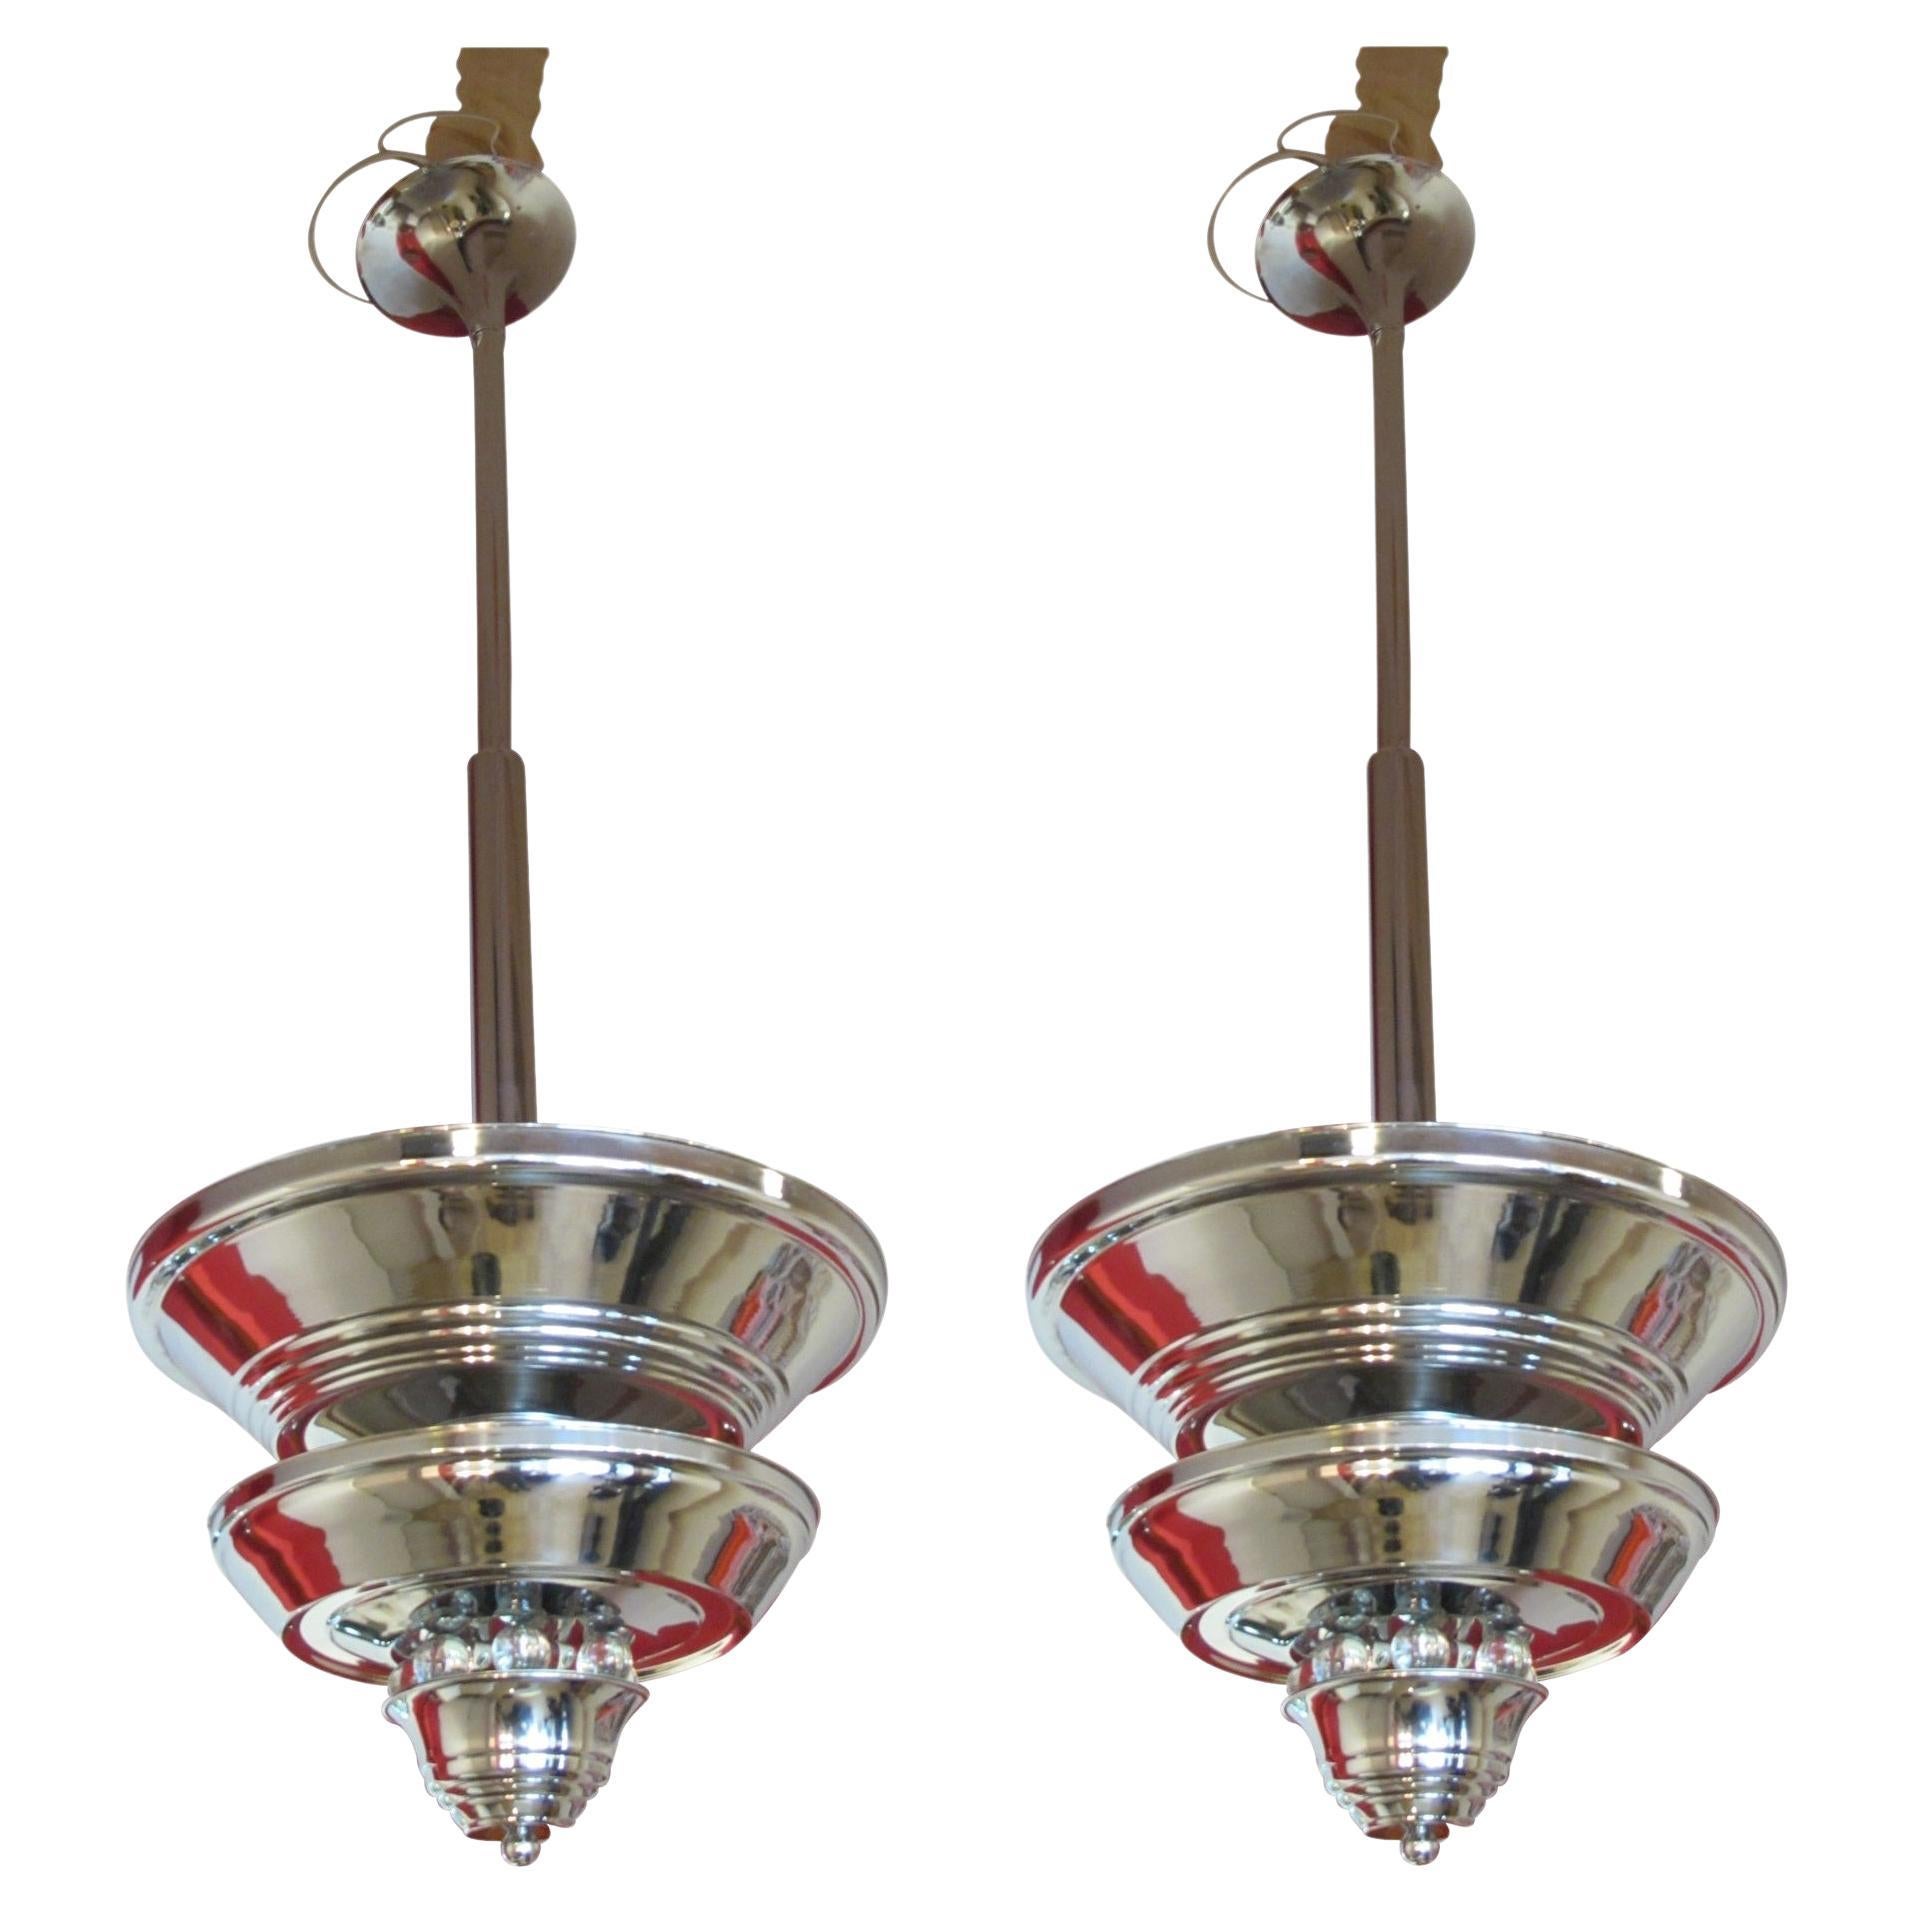 2 Amaizing Art Deco lamps in chrome, German in Style Art Deco, 1930